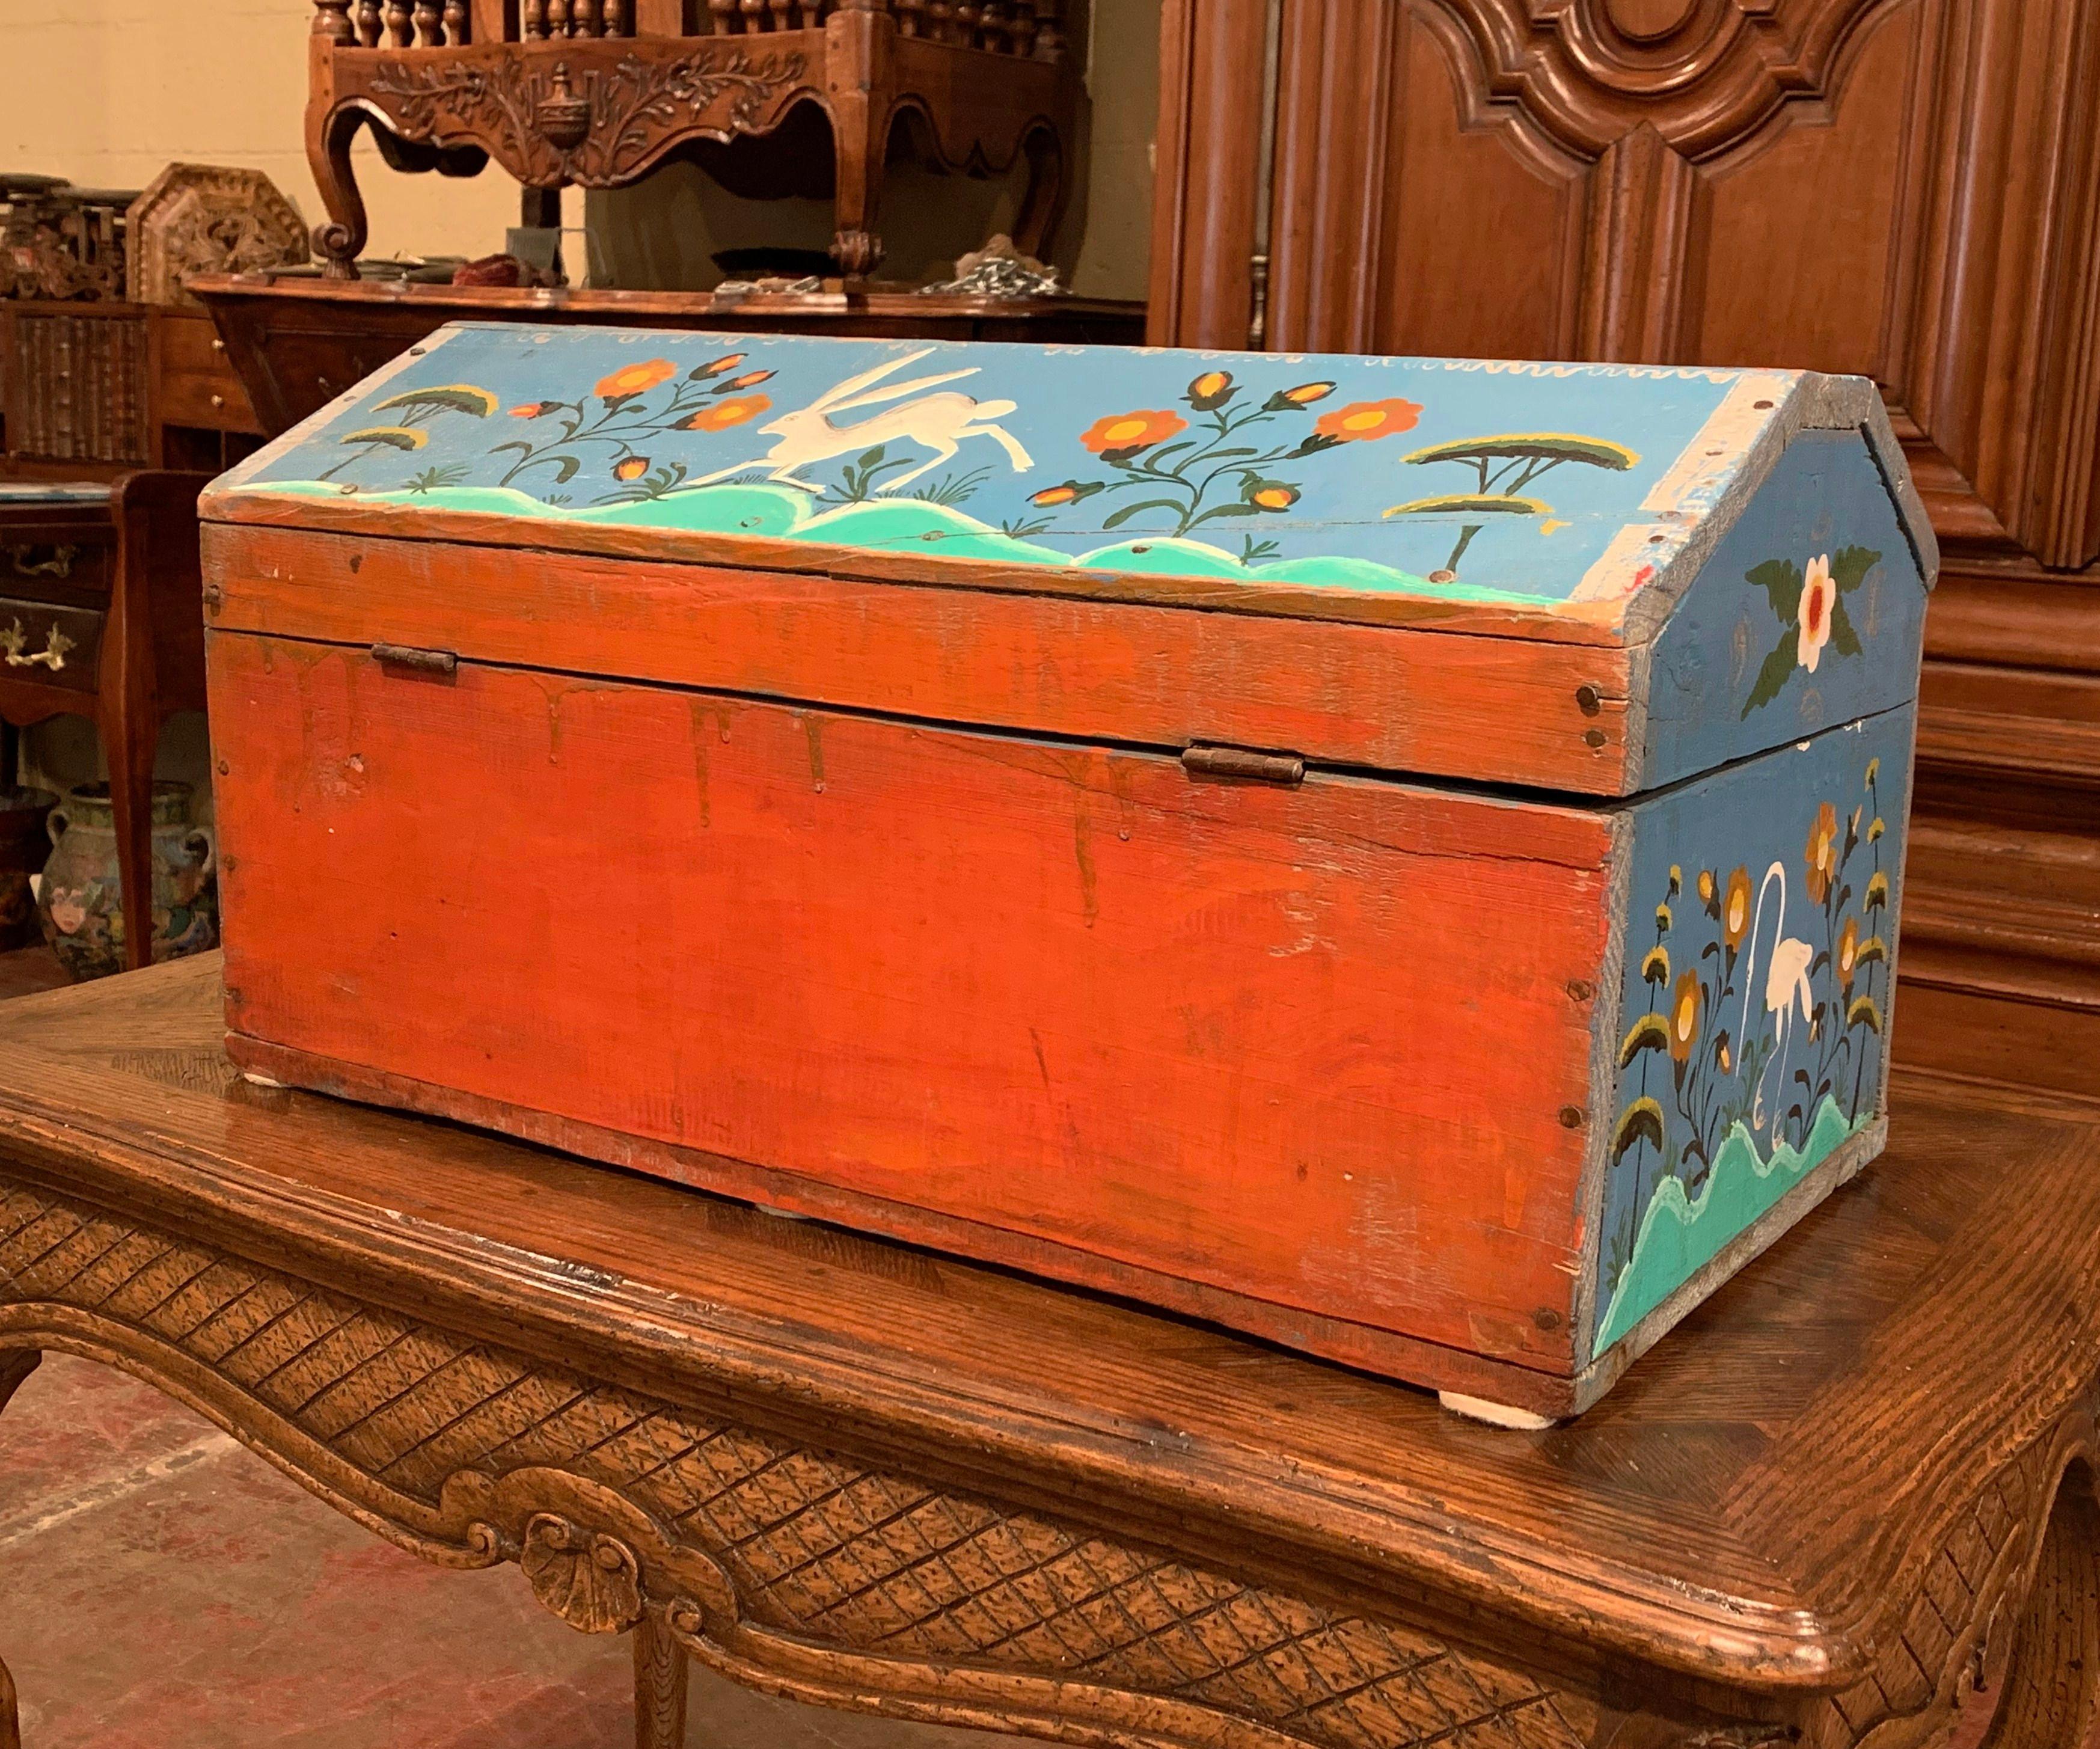 19th Century French Hand Painted Trunk with Rabbit and Deer Motifs from Normandy 2